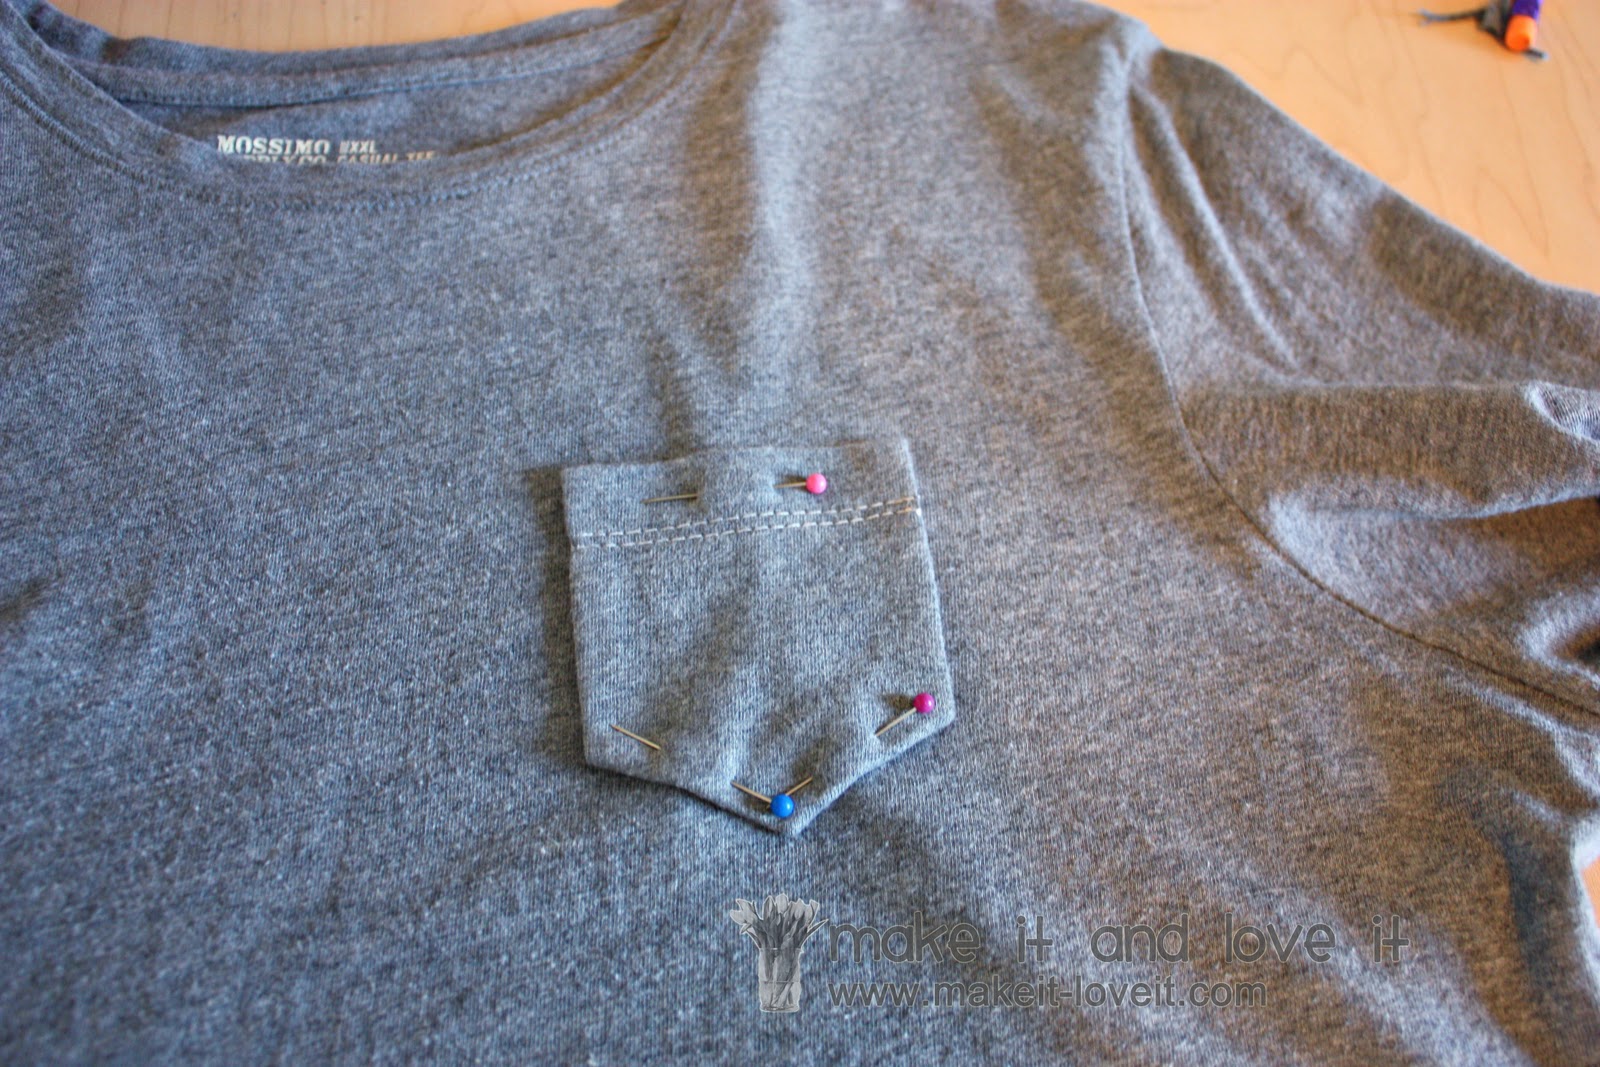 Re-purposing: Women's Long Sleeved Shirt into Short Sleeves......and a ...